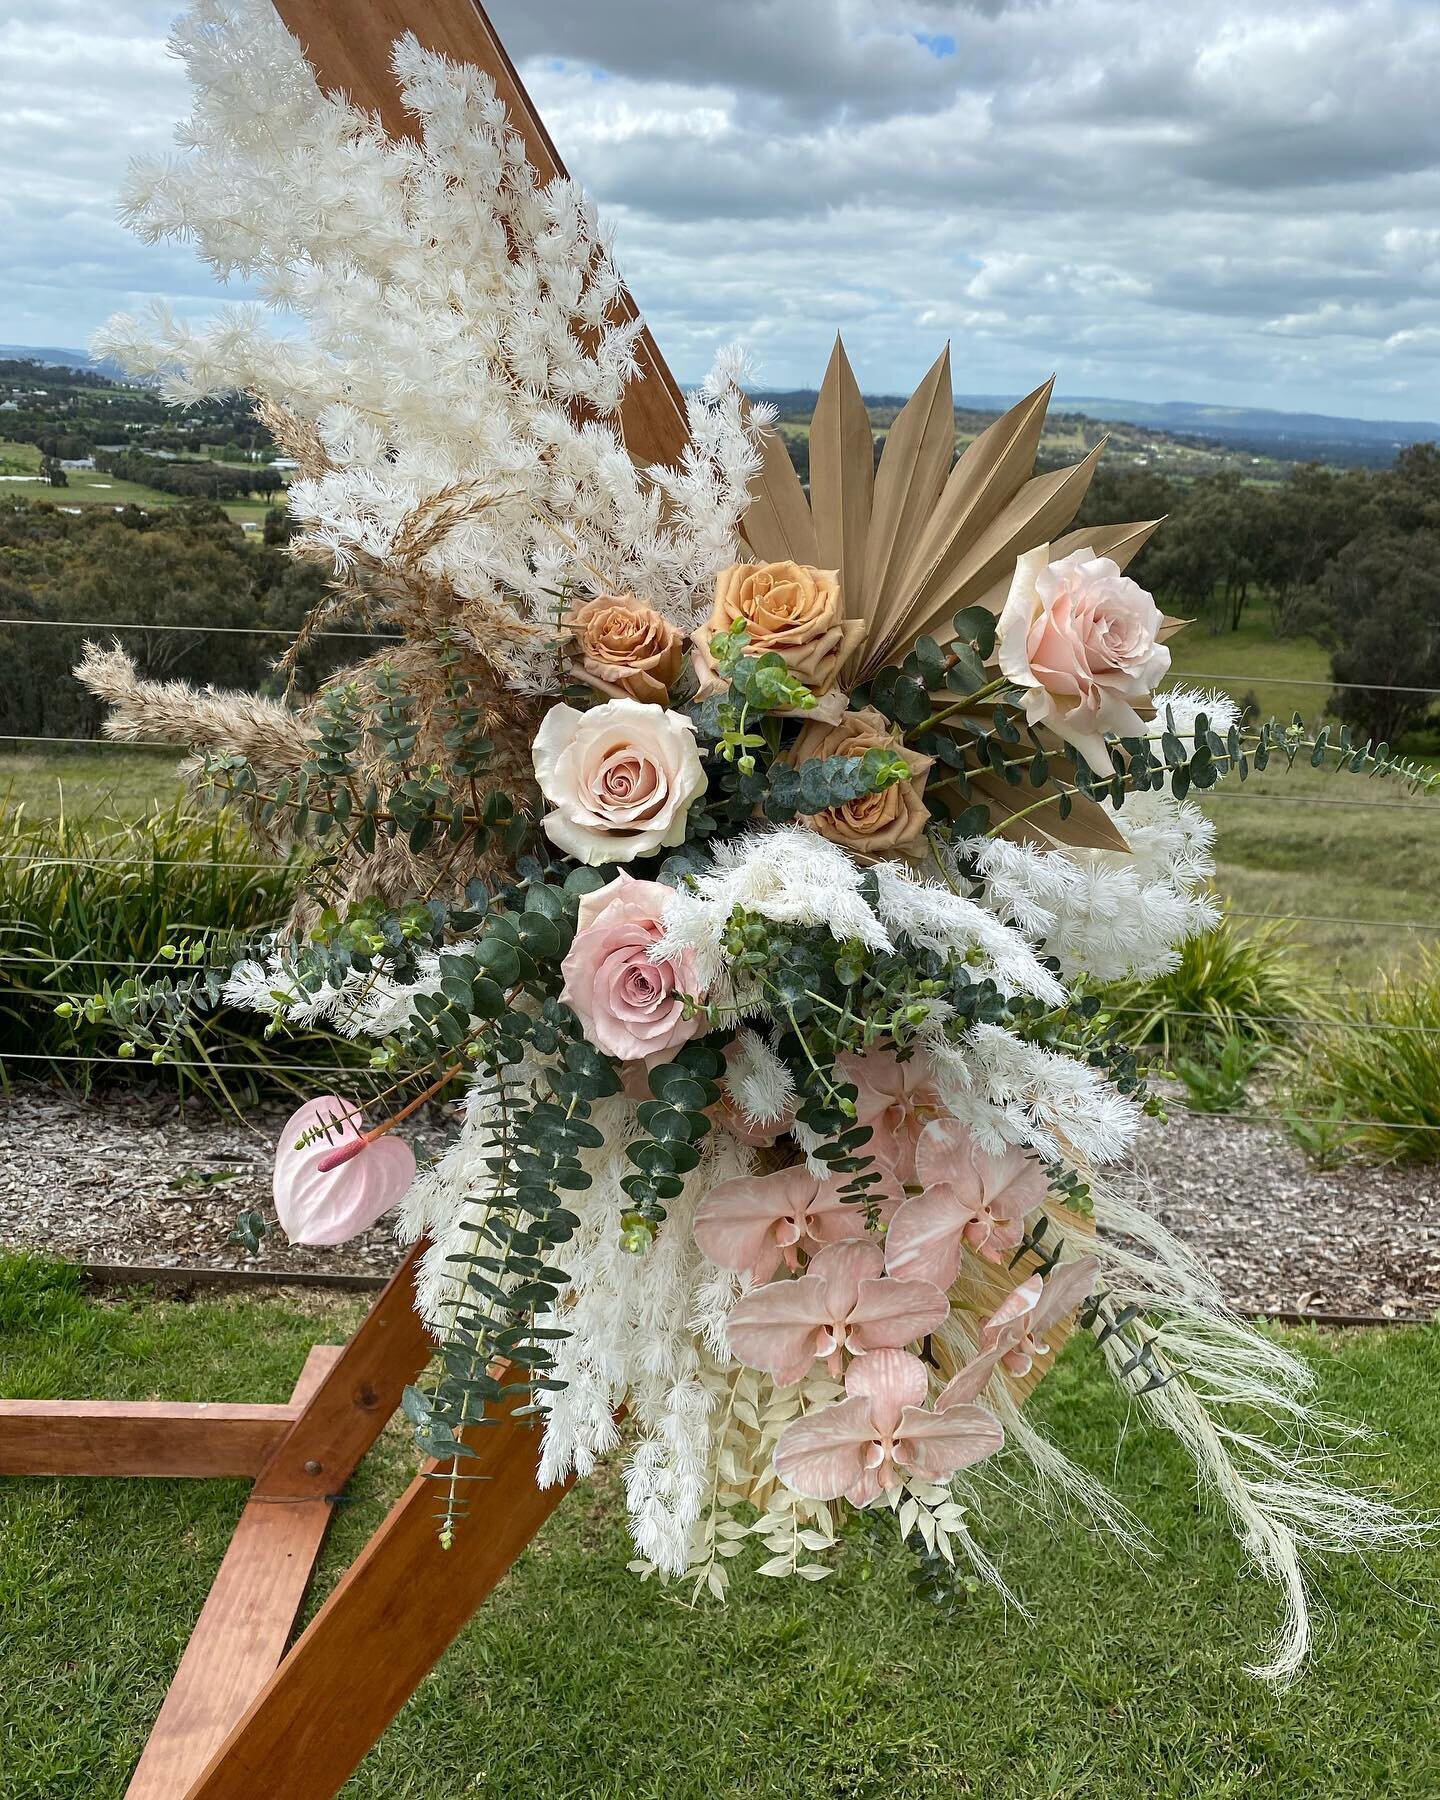 Elsablooms always does an amazing creation. &lsquo;Food I Am&rsquo; was the stunning venue for Shana &amp; Nicole&rsquo;s wedding over the weekend. Loved it all 💖💐🥂#janetschirmermarriagecelebrant#celebrant#waggaweddings #foodiam #ido #love #riveri